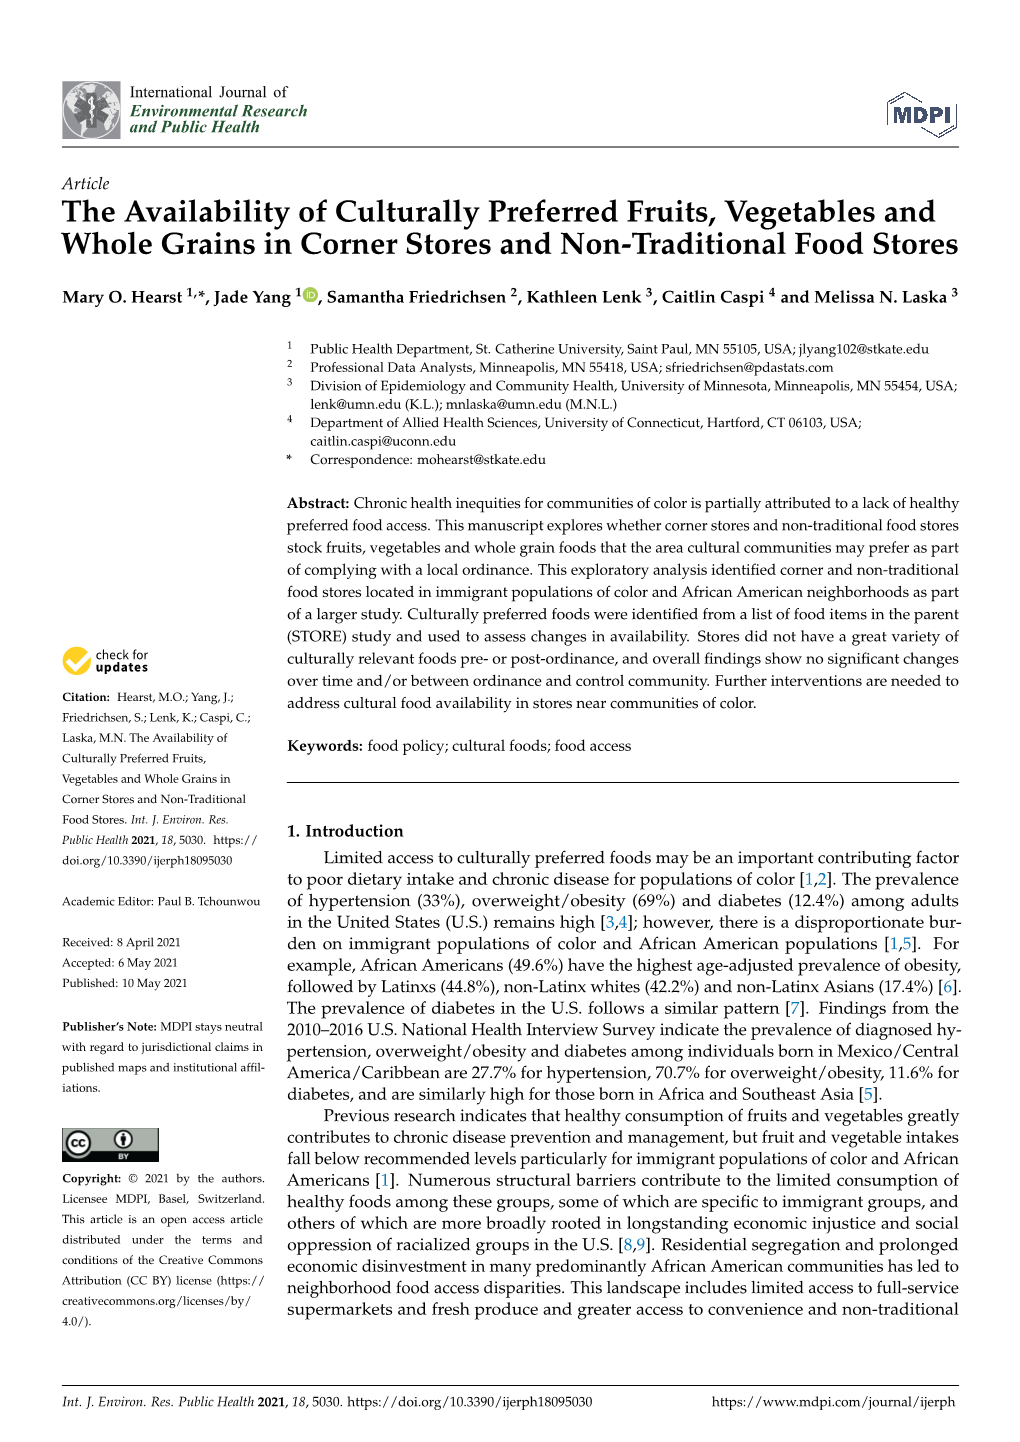 The Availability of Culturally Preferred Fruits, Vegetables and Whole Grains in Corner Stores and Non-Traditional Food Stores